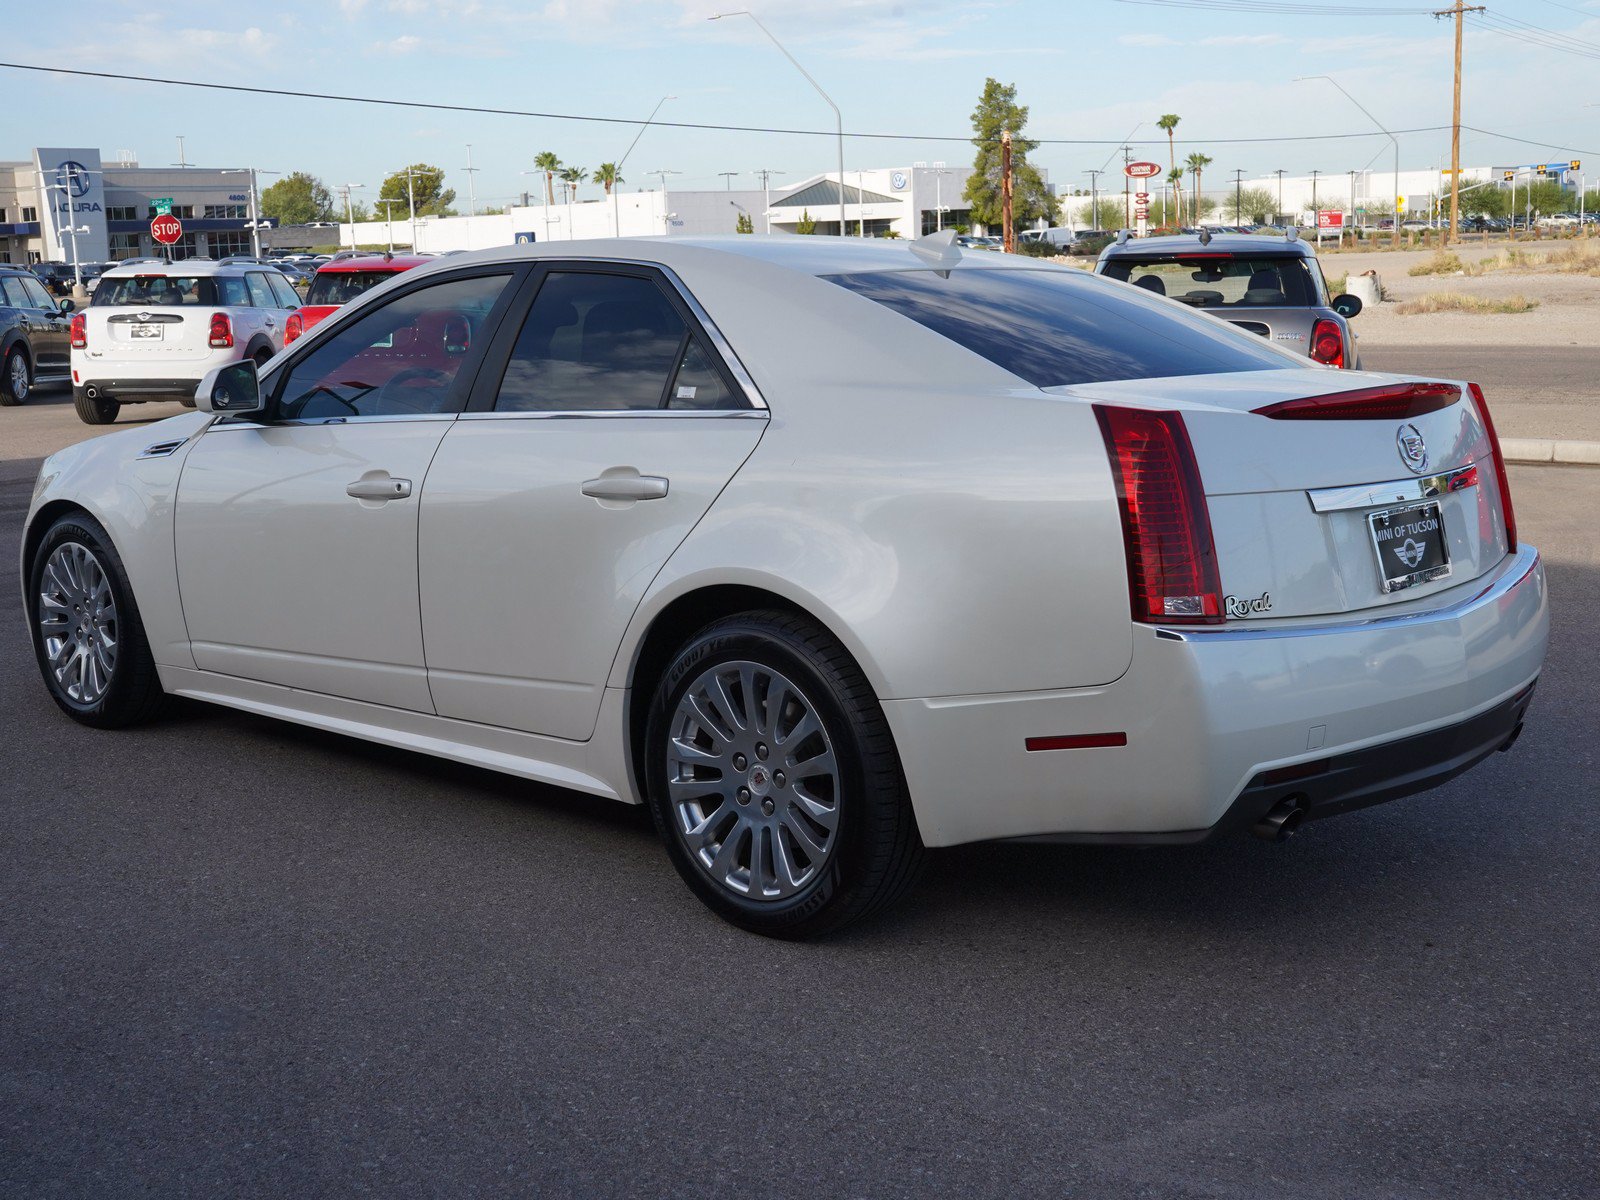 PreOwned 2010 Cadillac CTS Sedan Performance 4dr Car in Tucson 